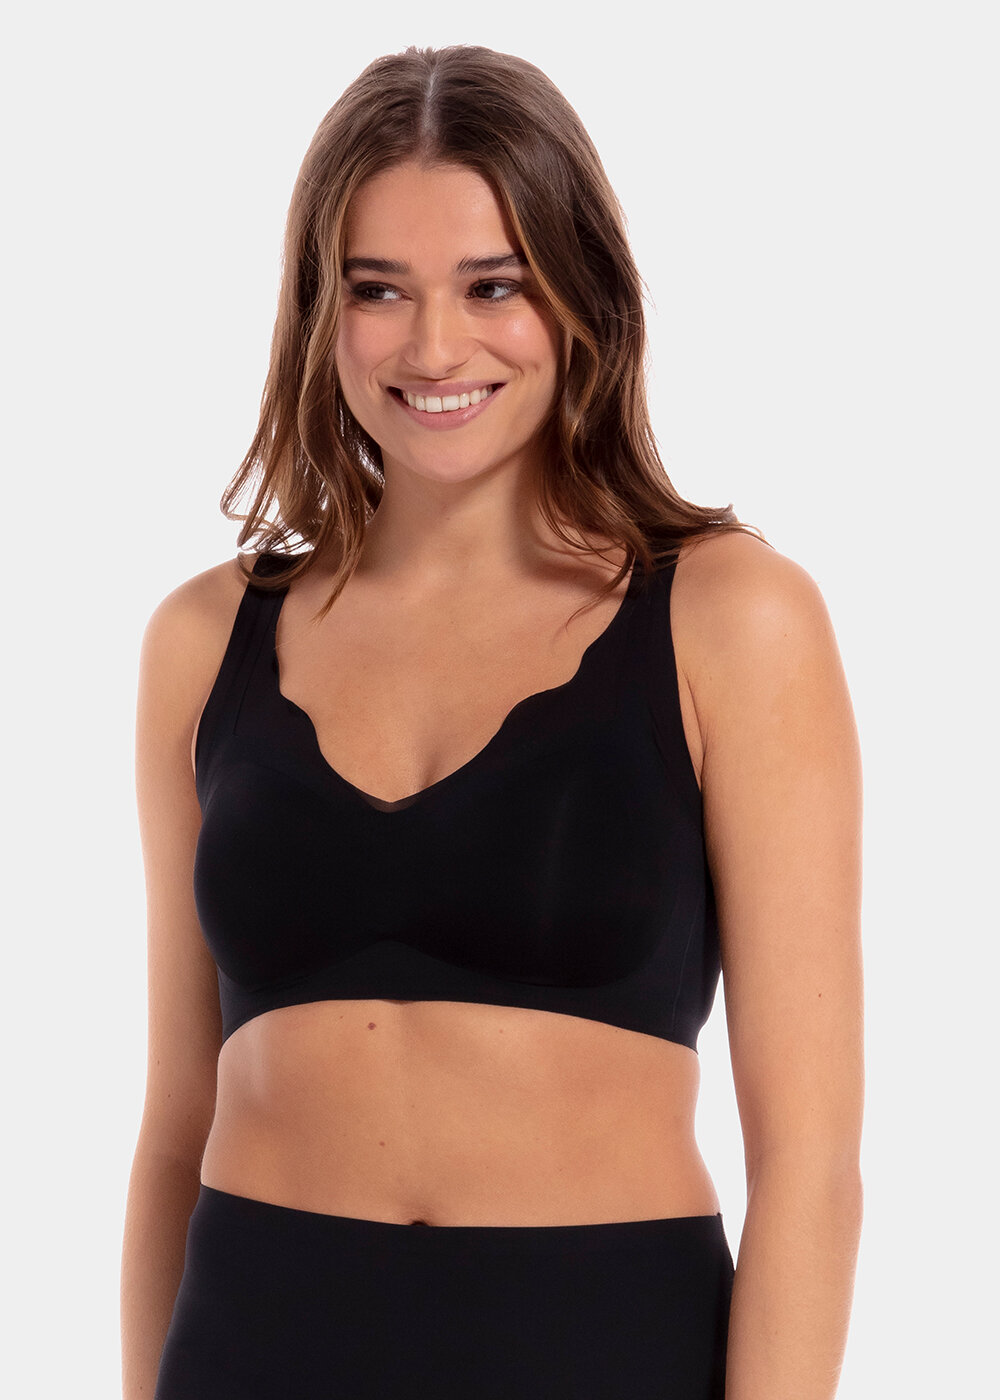 Buy Get in Shape Magic Bra with Belt & Thigh Shaper Online at Best